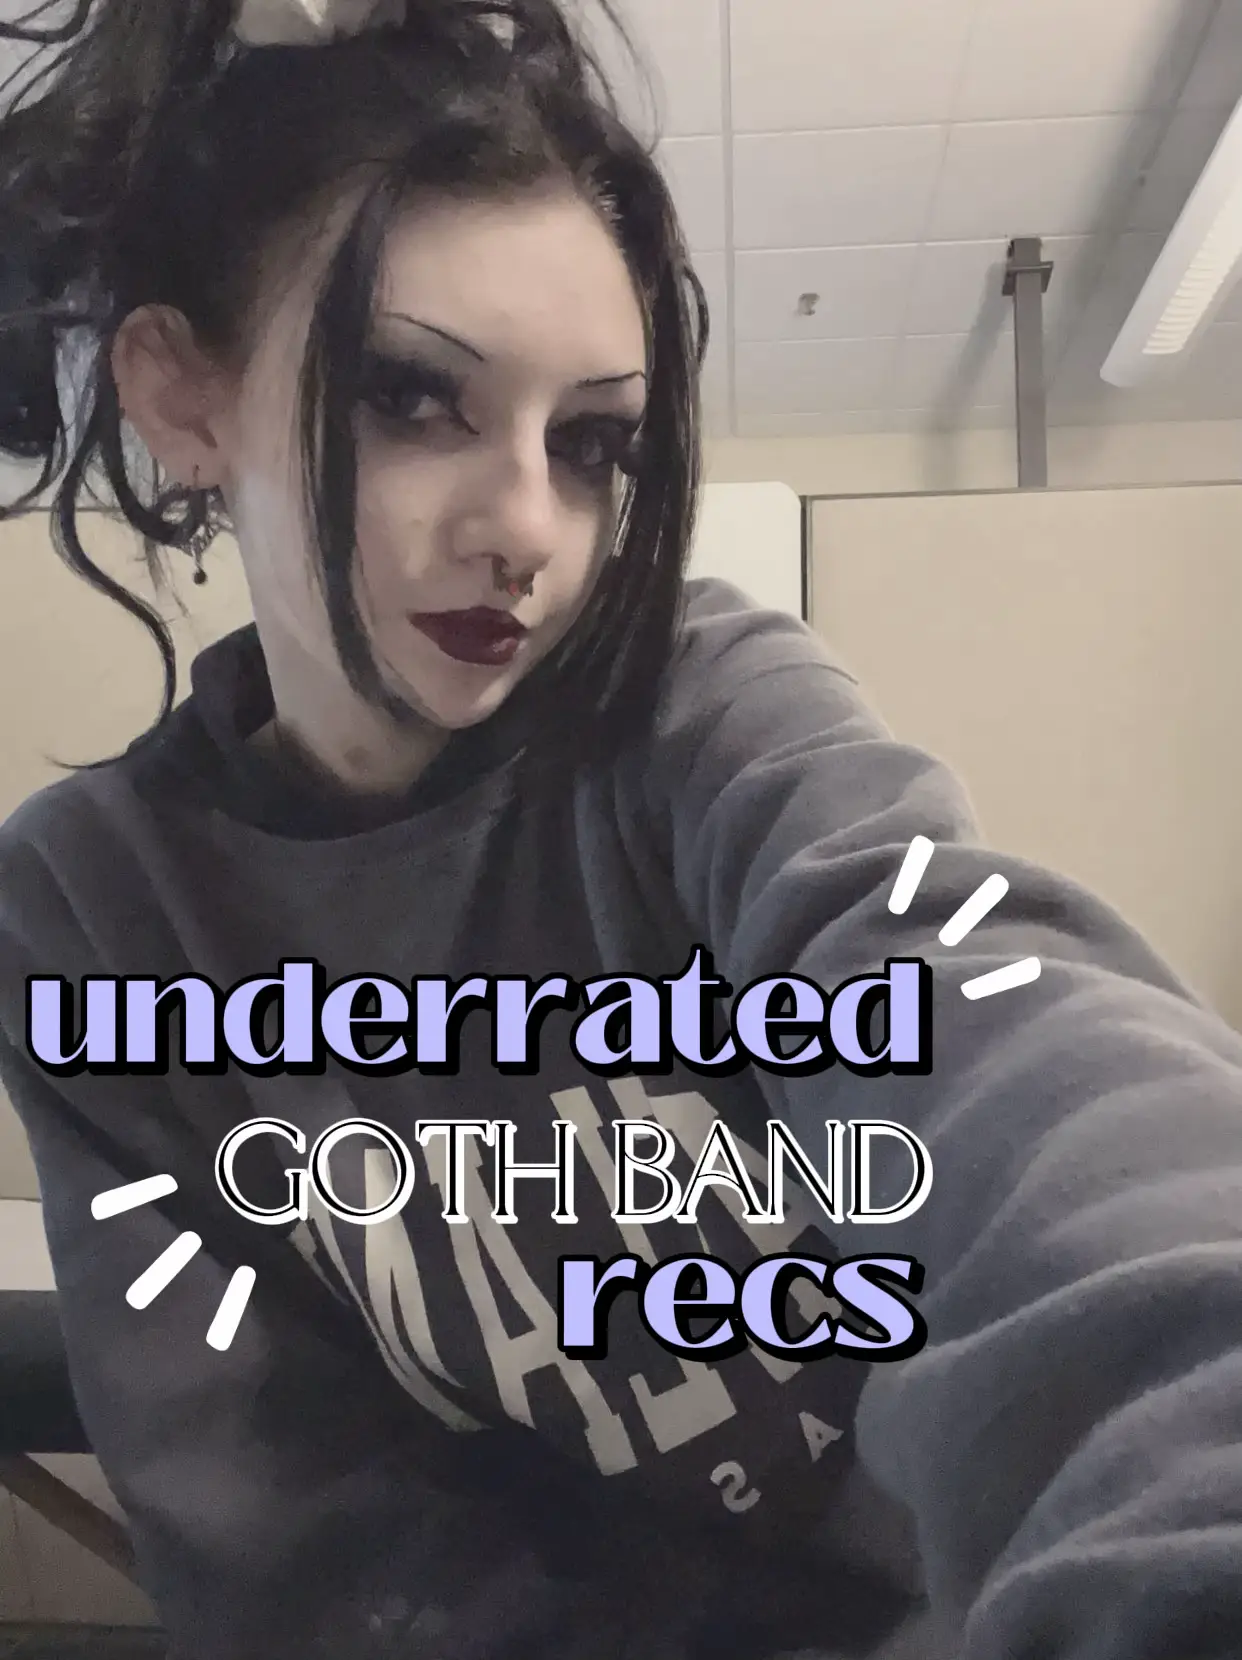 played around with white base makeup and grey contour 🖤 love how it turned  out :) : r/GothFashion